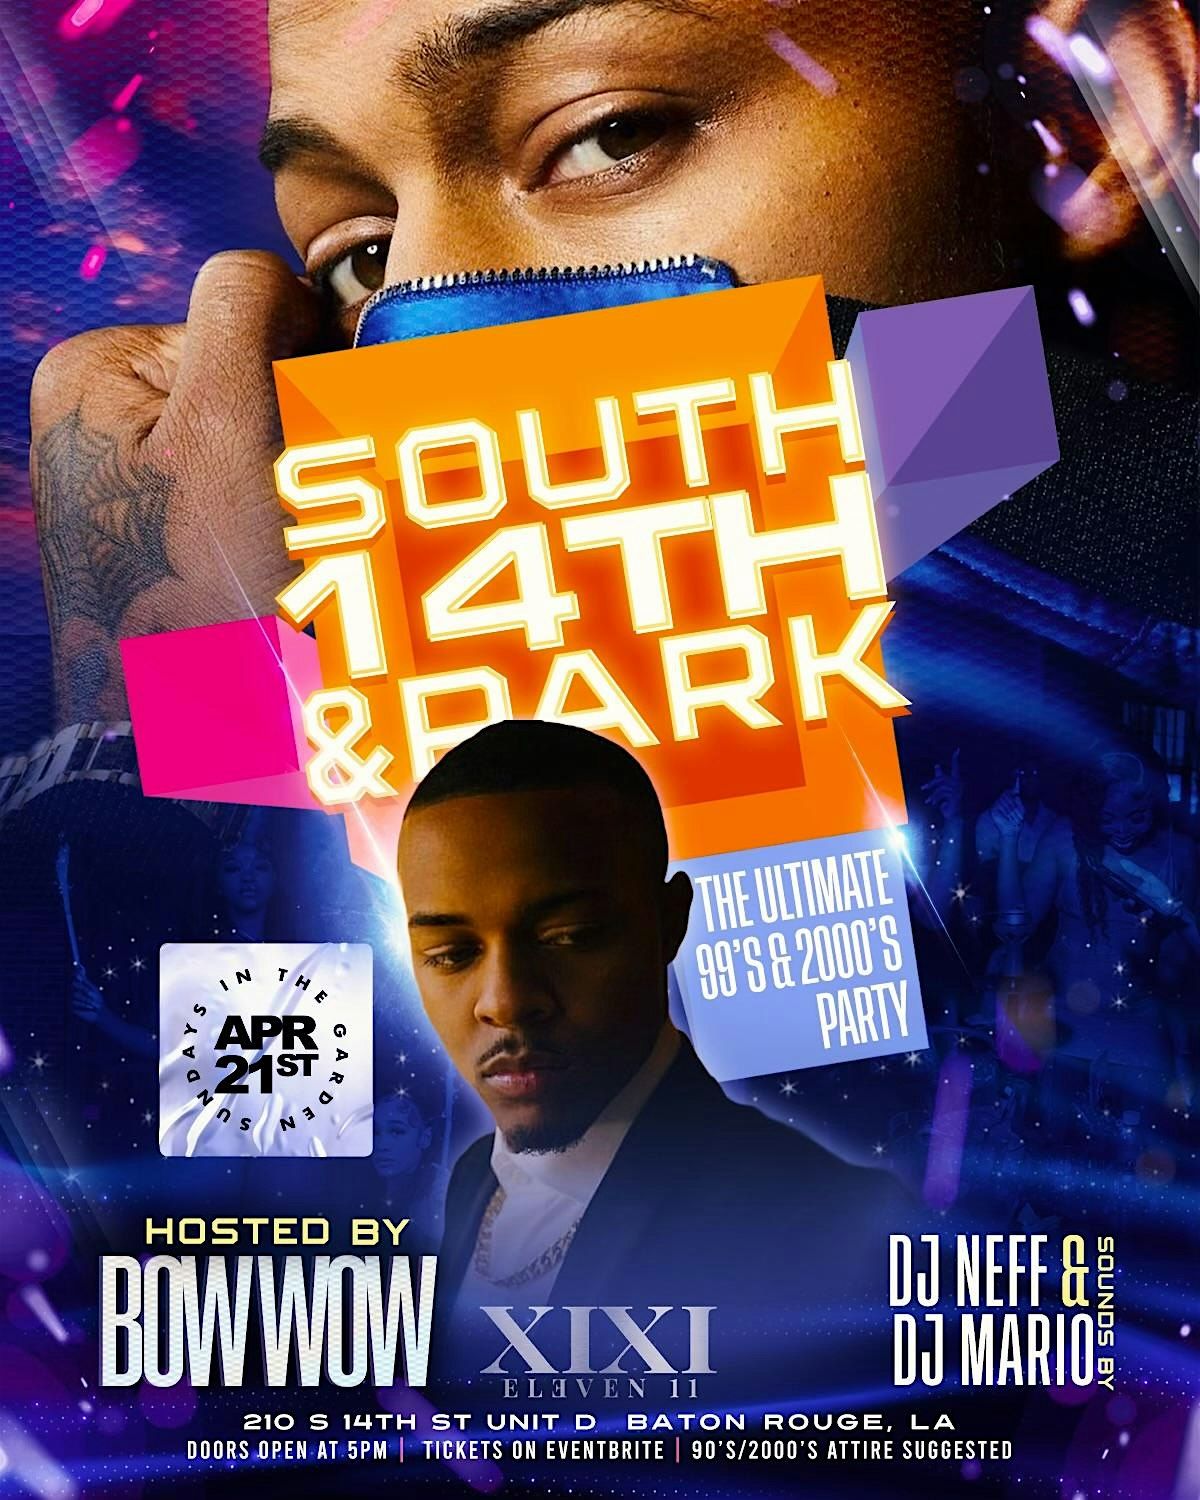 South 14th & Park HOSTED BY BOW WOW 99 2000s Party